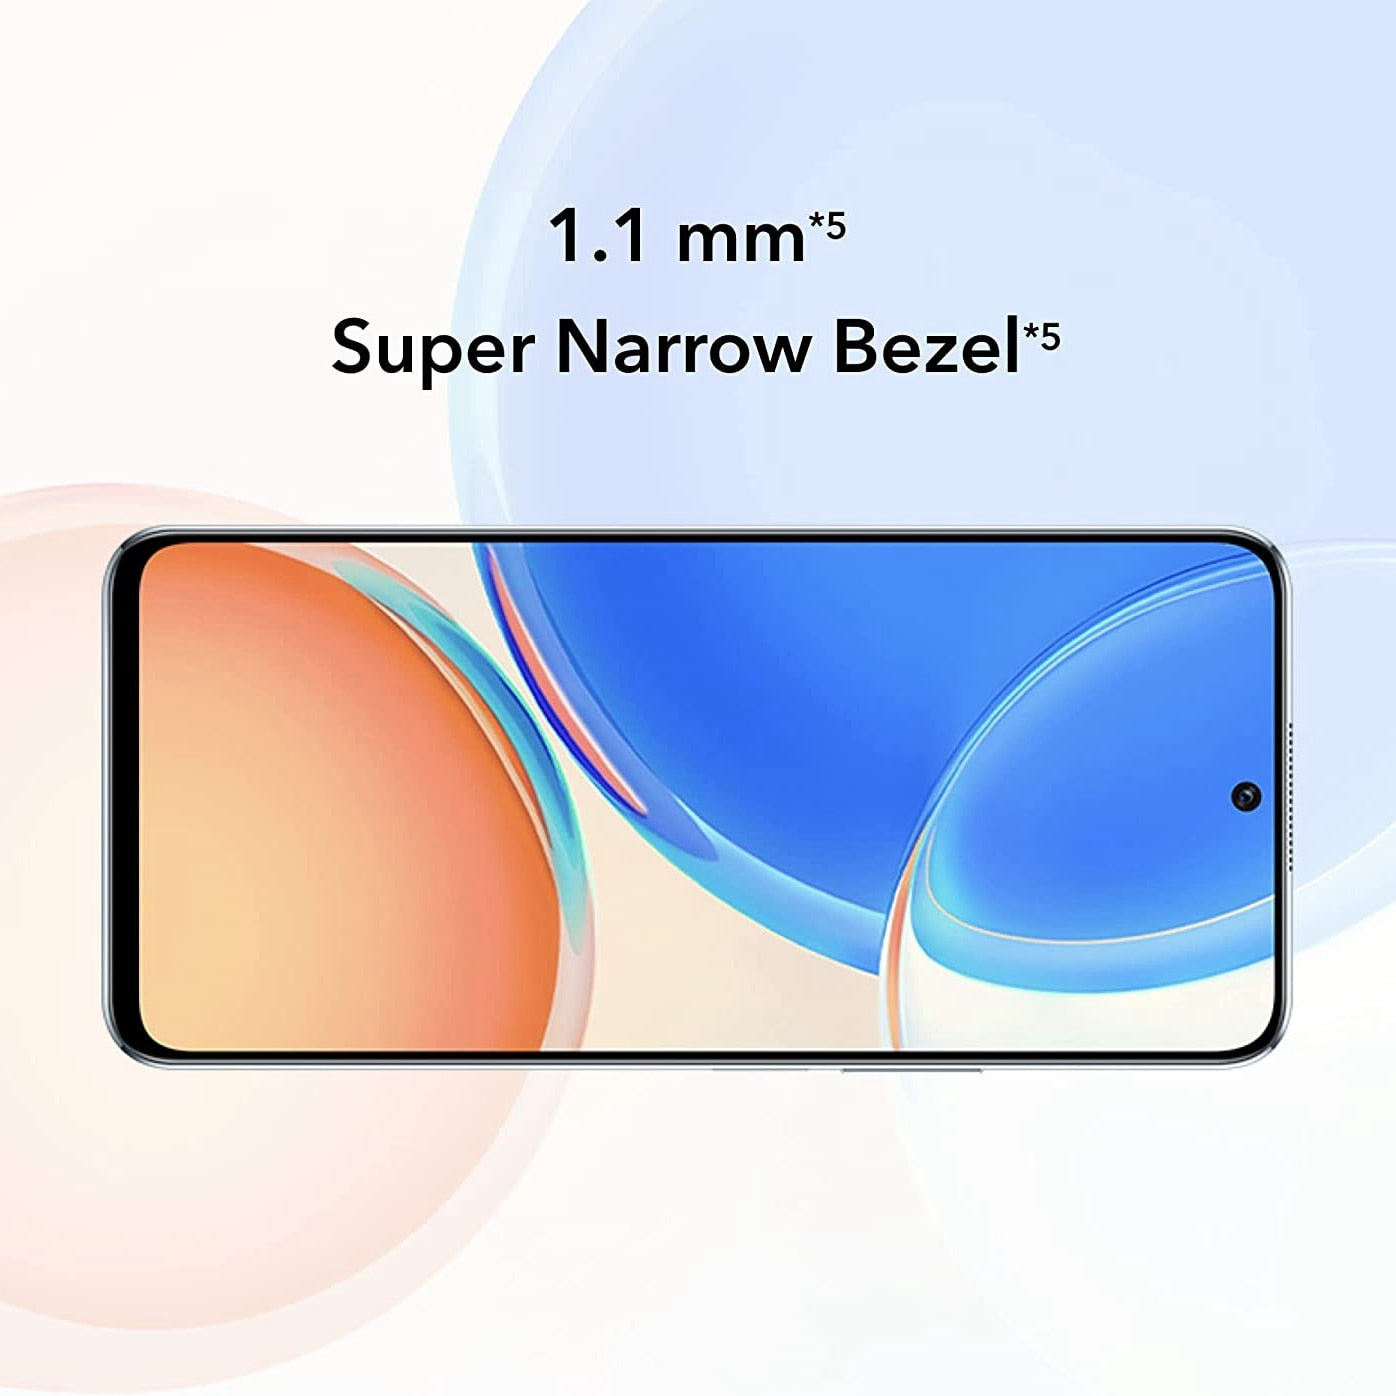 HONOR X8 Smartphone Global Version 6.7" FHD 90Hz 6+128GB Android Mobile 22.5W Super Charge Snapdragon 680 Quad Camera Cell Phone